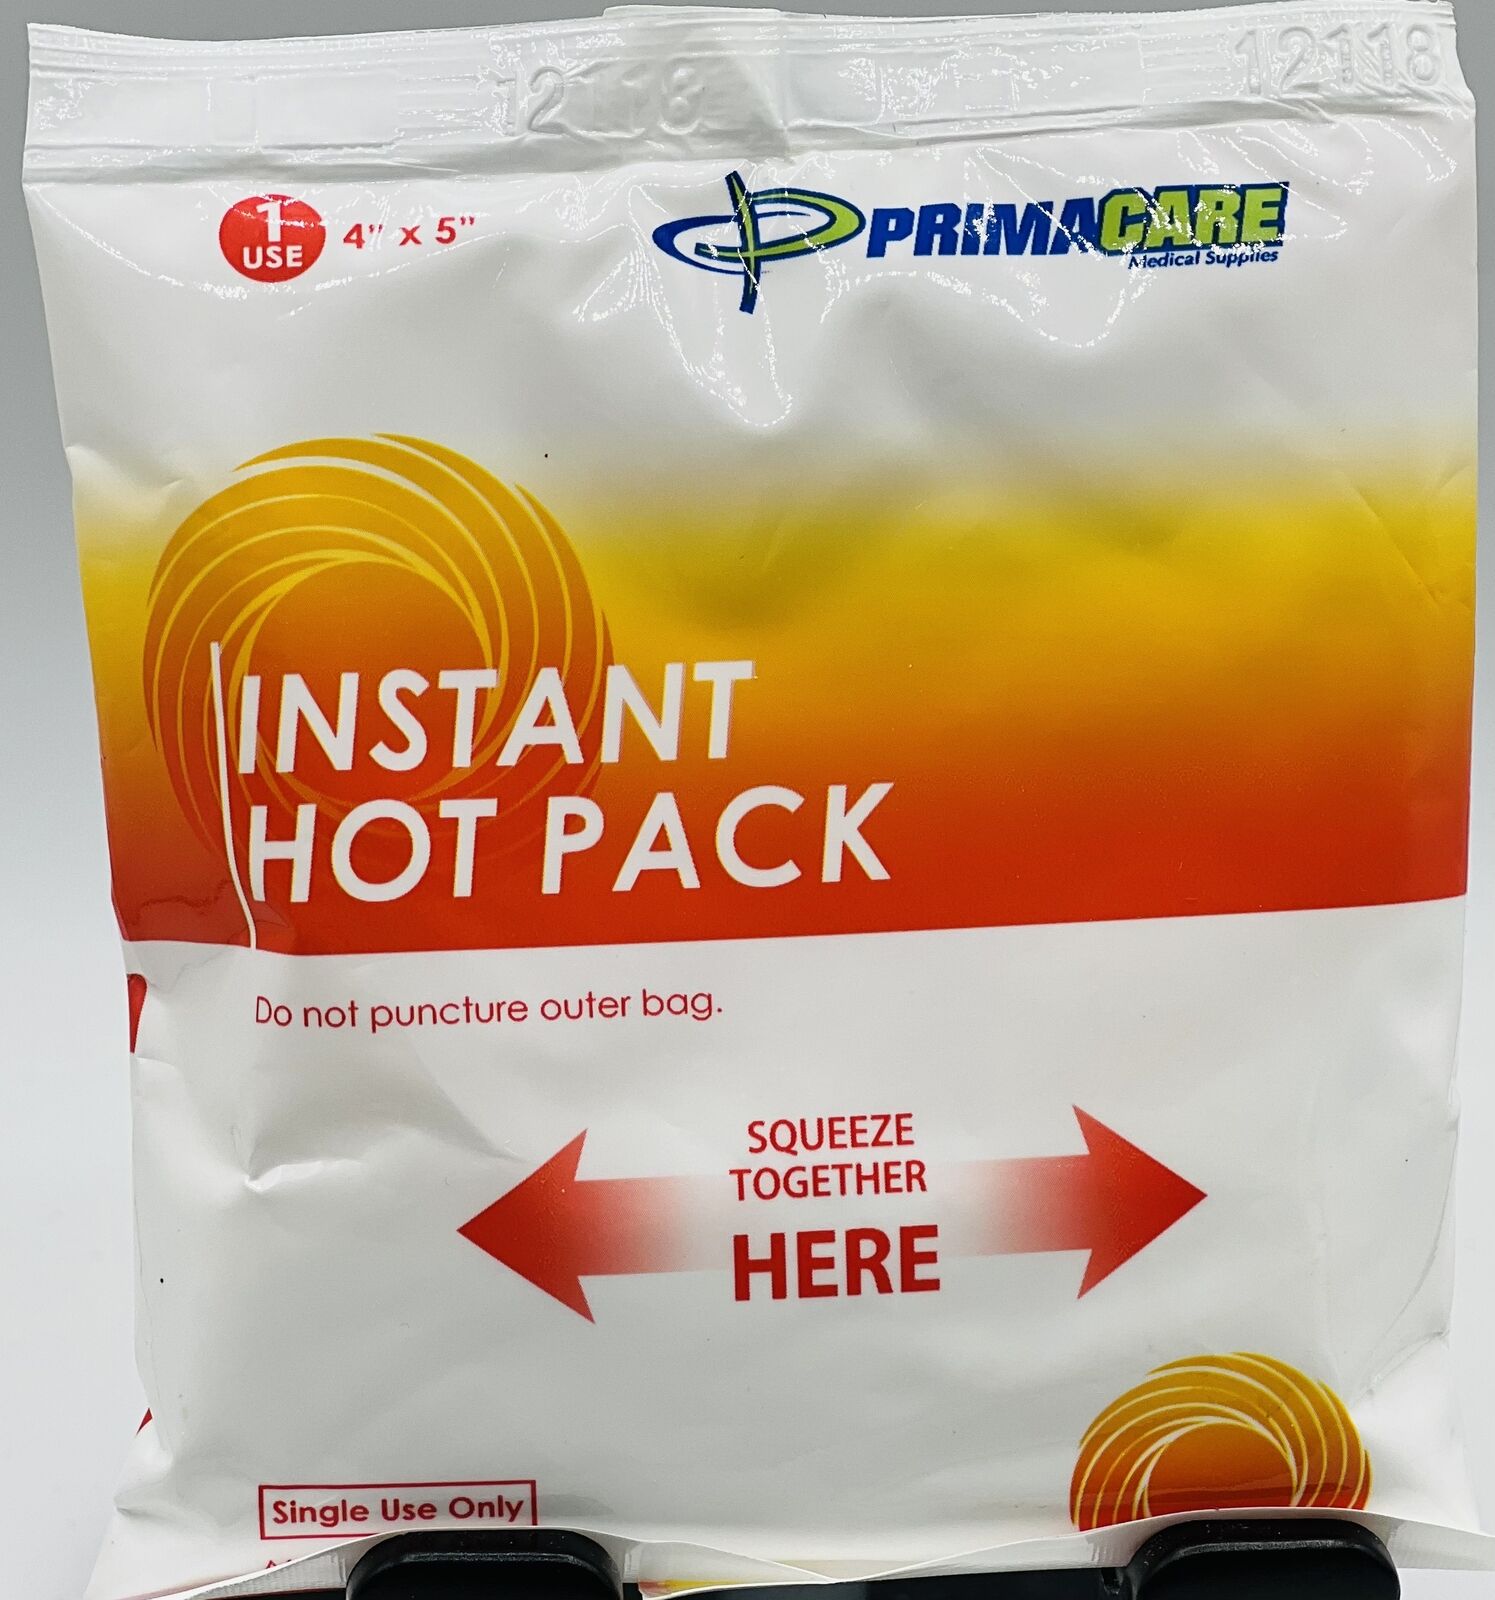 22 Piece Primacare Medical Supplies Instant Hot Pack 4" X 6"  Each